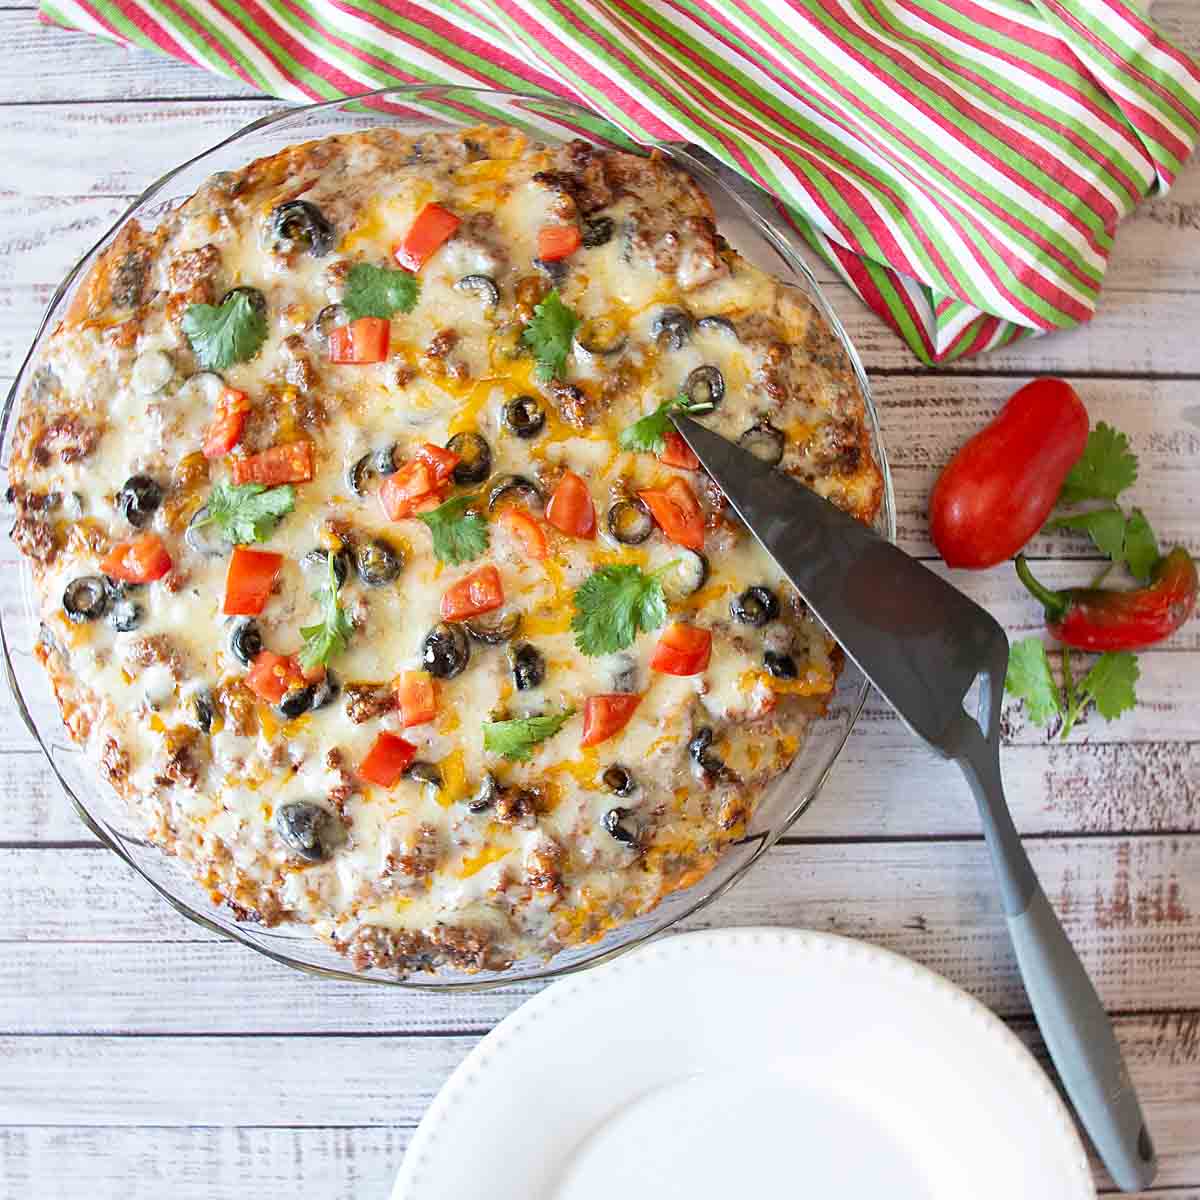 Chicago-Style Deep Dish Pizza Recipe • The Curious Chickpea